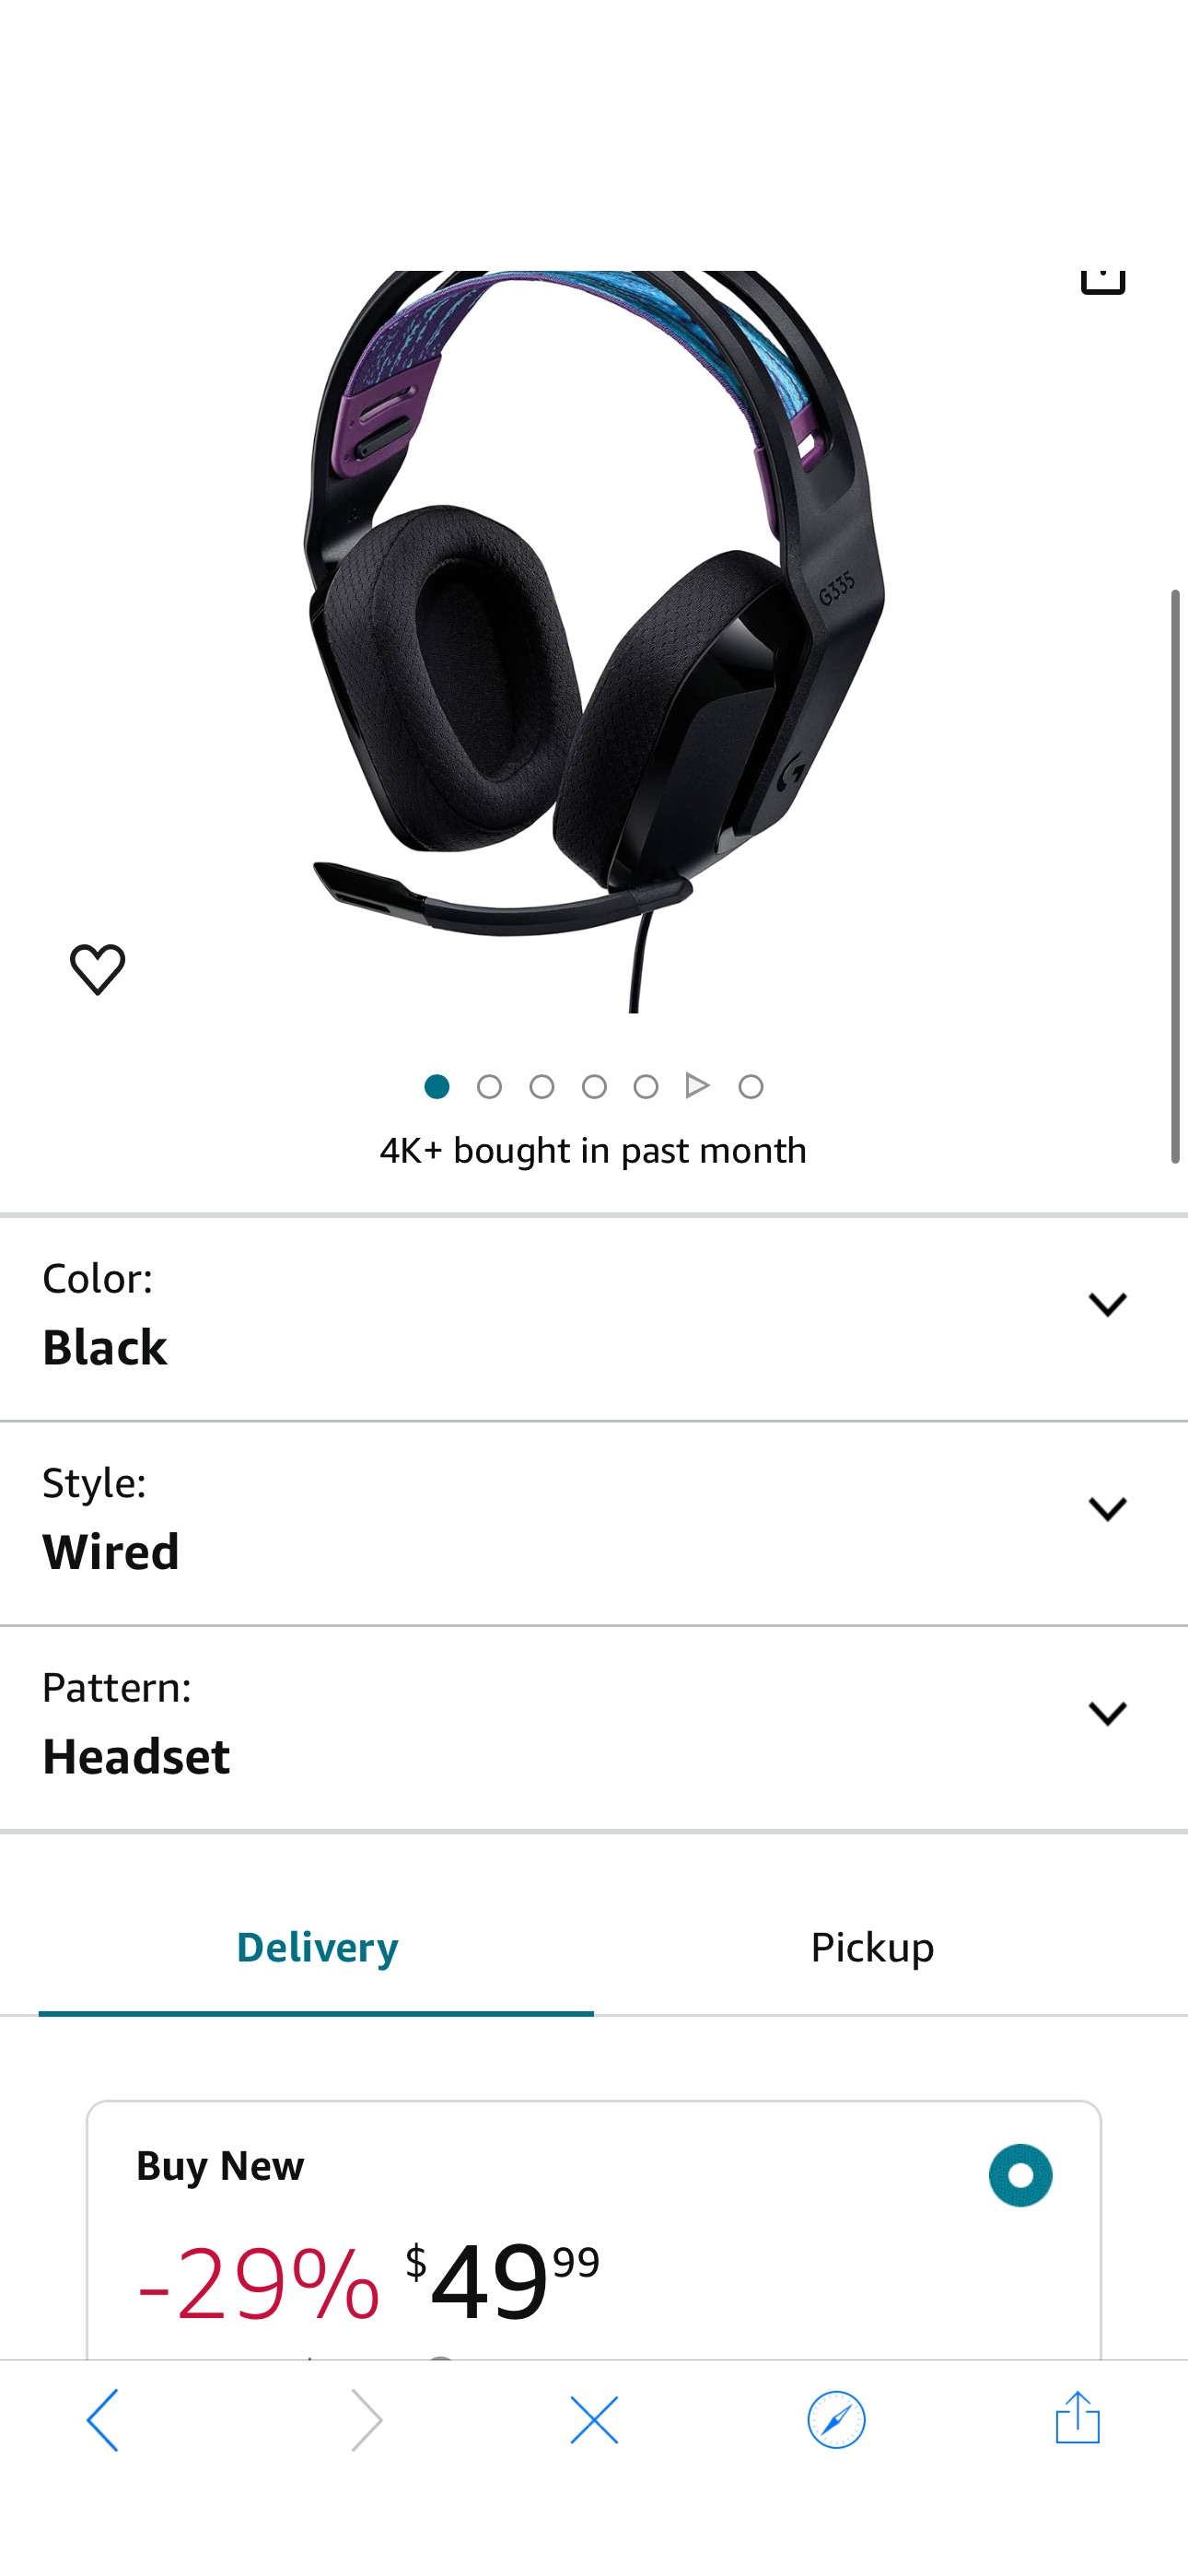 Amazon.com: Logitech G335 Wired Gaming Headset, with Flip to Mute Microphone, 3.5mm Audio Jack, Memory Foam Earpads, Lightweight, Compatible with PC, PlayStation, Xbox, Nintendo Switch - Black : Video